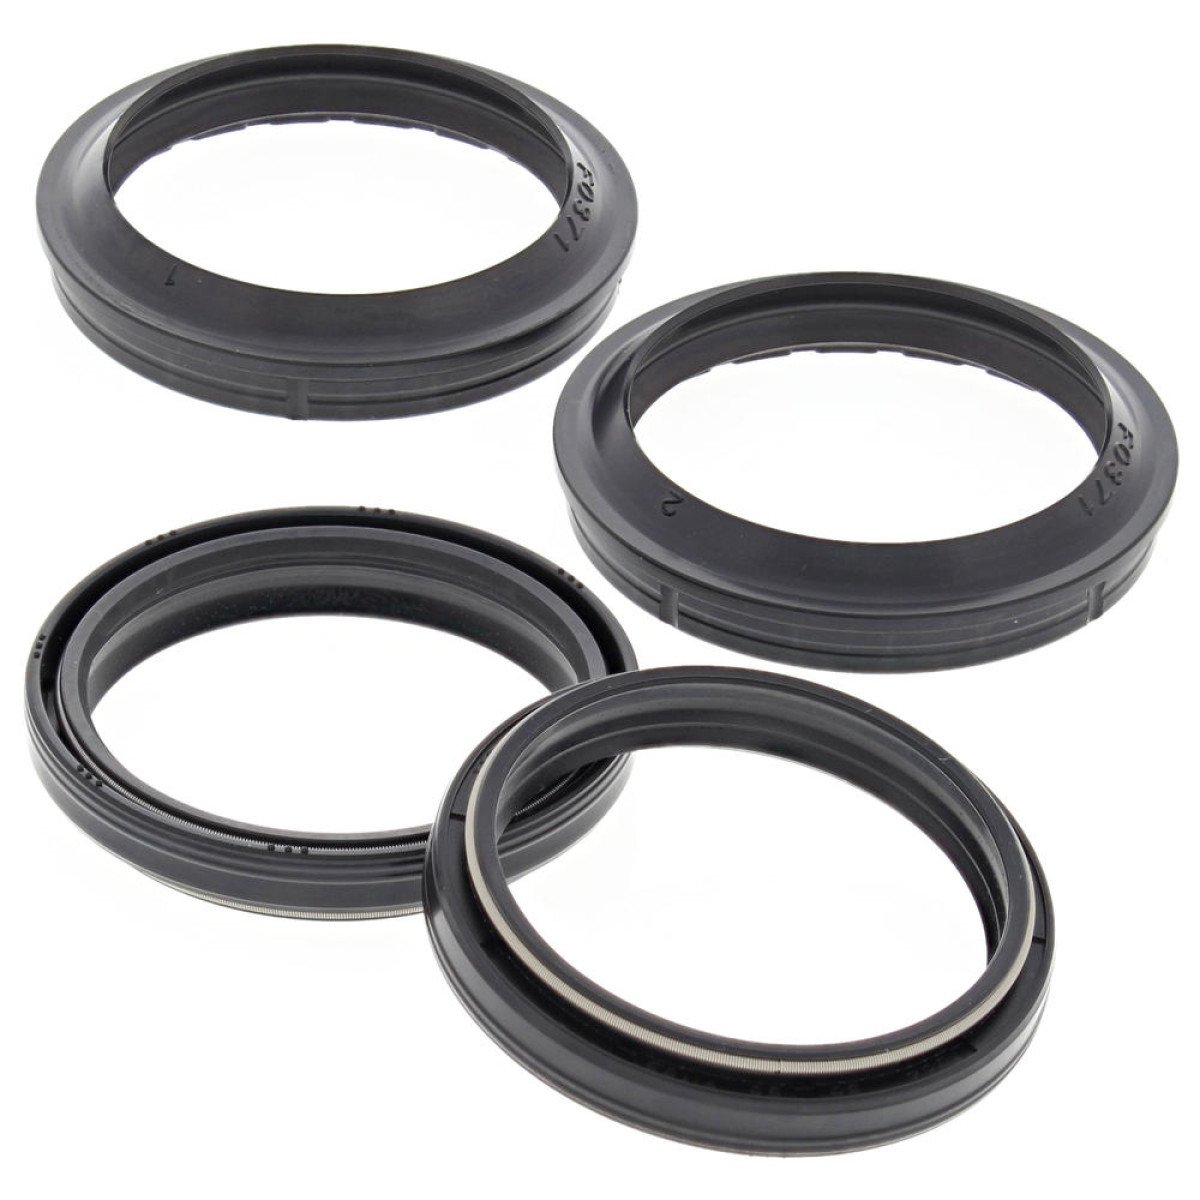 Moose Racing Fork Seal Kit with Dust Cap,  KTM SX 125 '99, SX 250 98-99, EXC 250/300 98-99, 50 x 50/60 x 10.5 mm